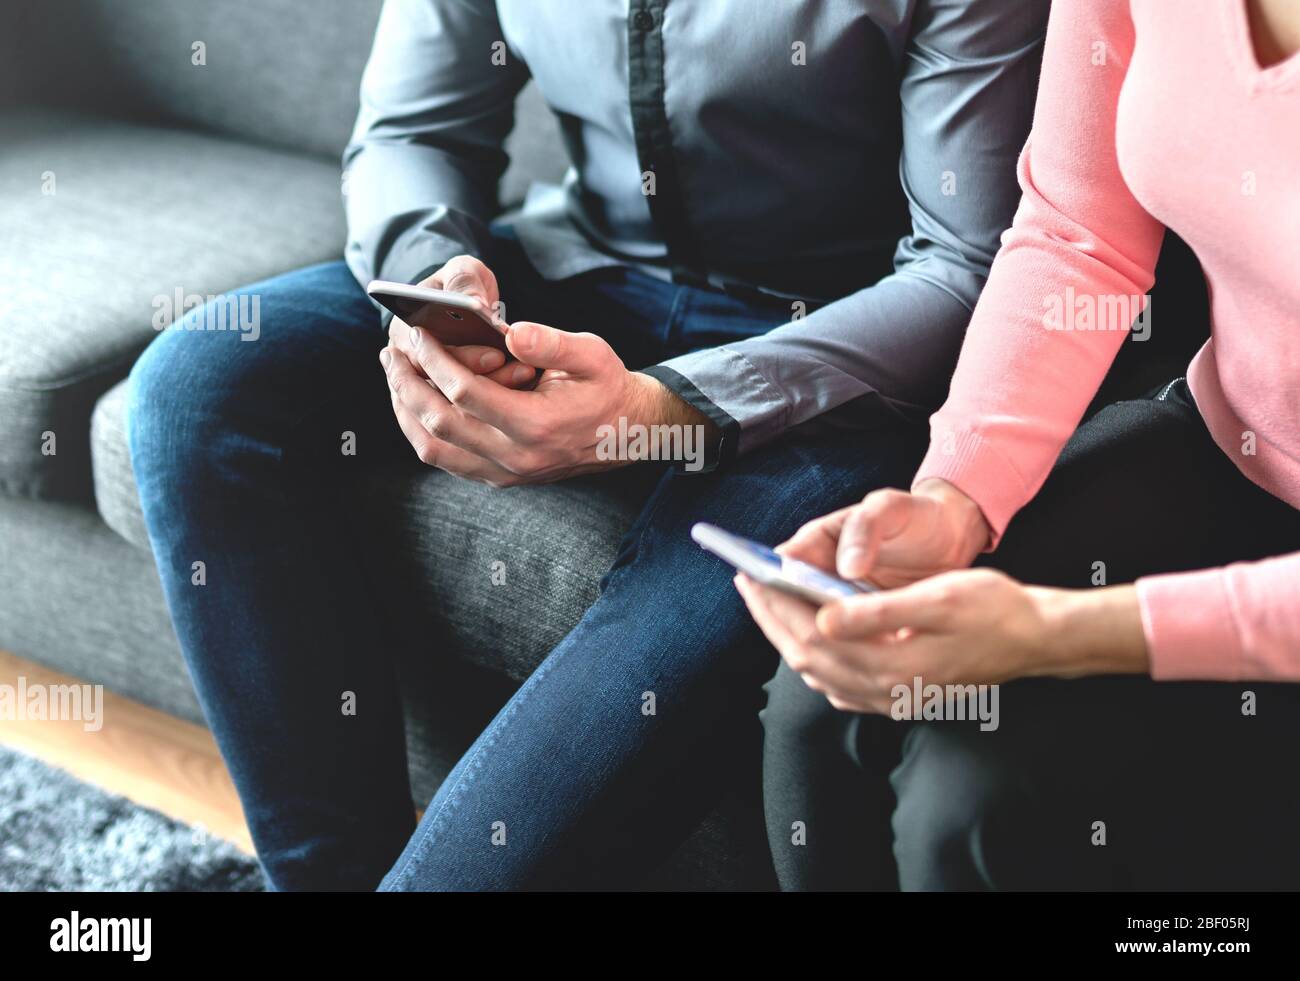 Two people using mobile phones. Business partners, friends or couple looking at their smartphones. Man and woman exchanging numbers during meeting. Stock Photo